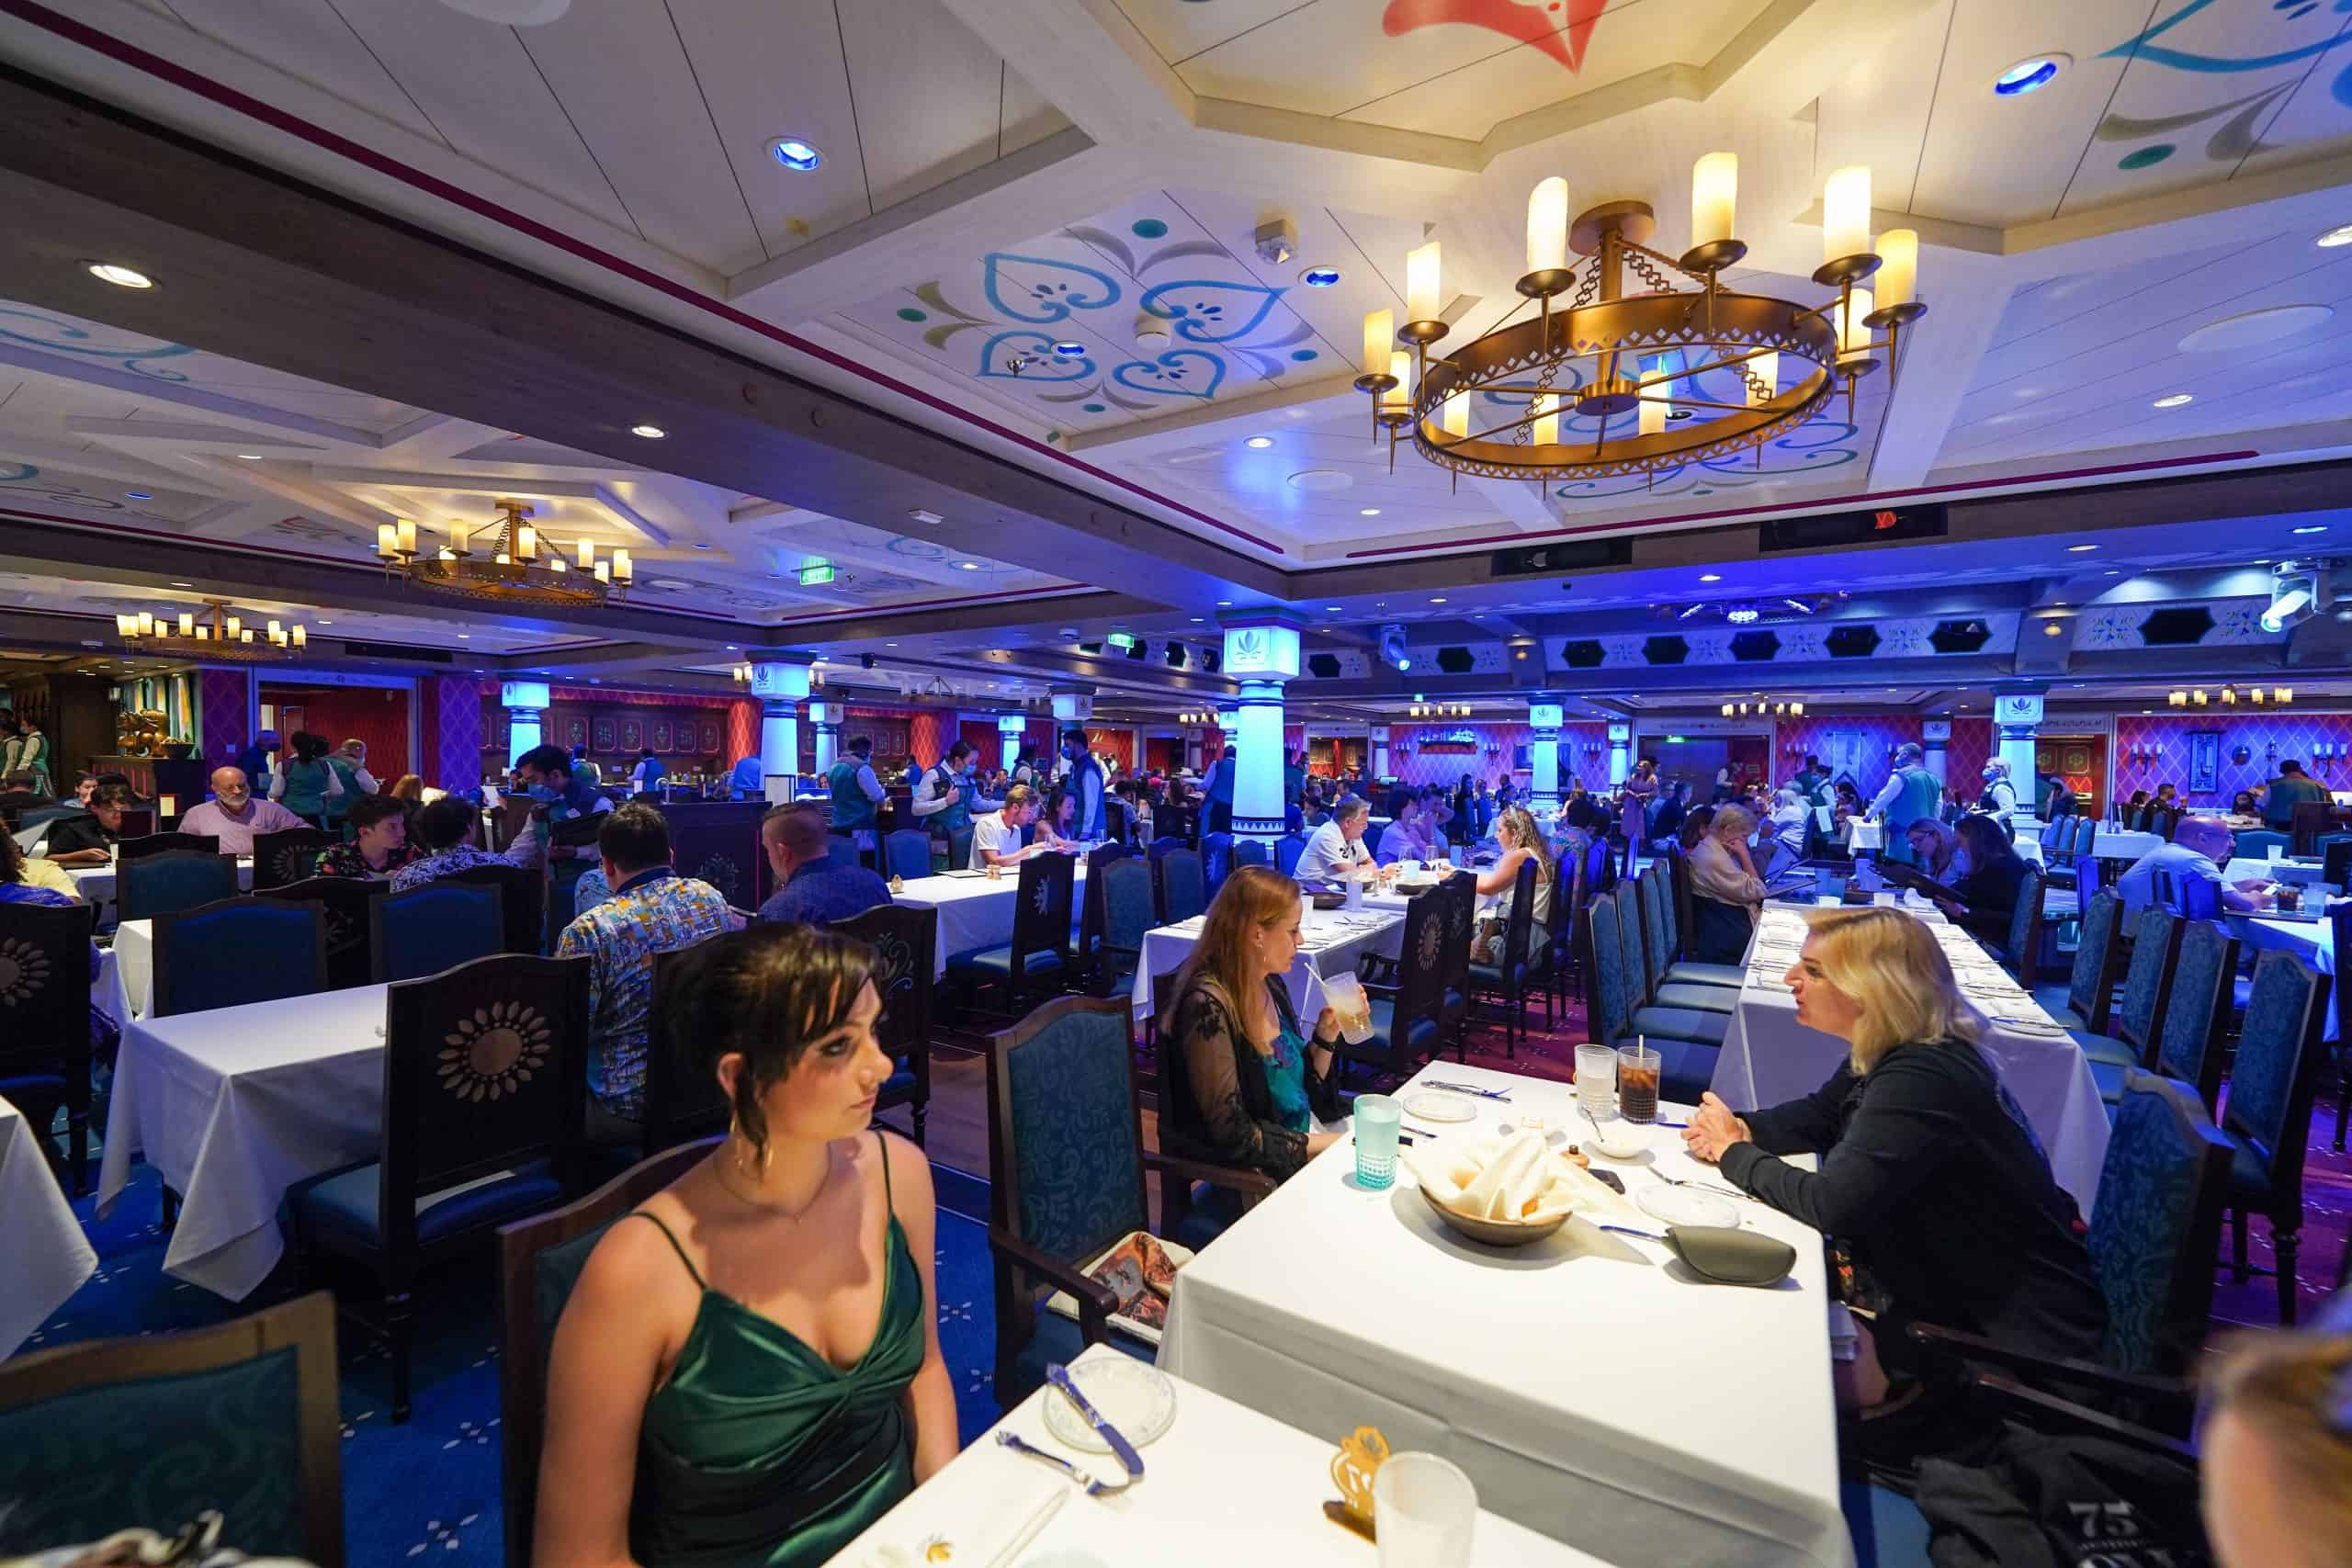 Disney Wish Cruise Line Dinner Shows Are Next Level